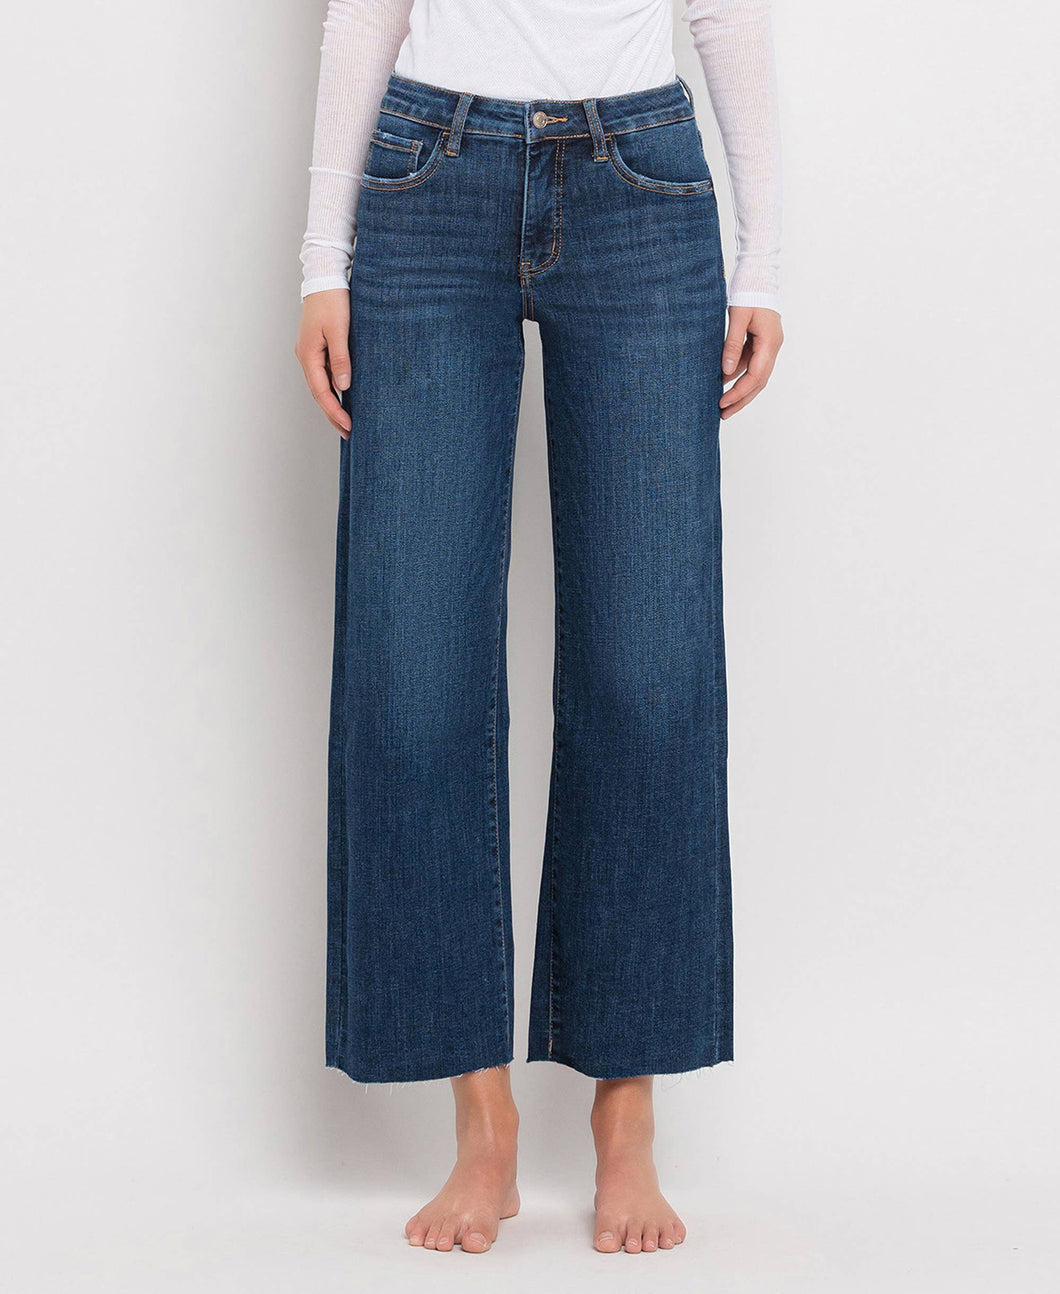 Finders Keepers- TUMMY CONTROL MID RISE WIDE LEG JEANS LV1311